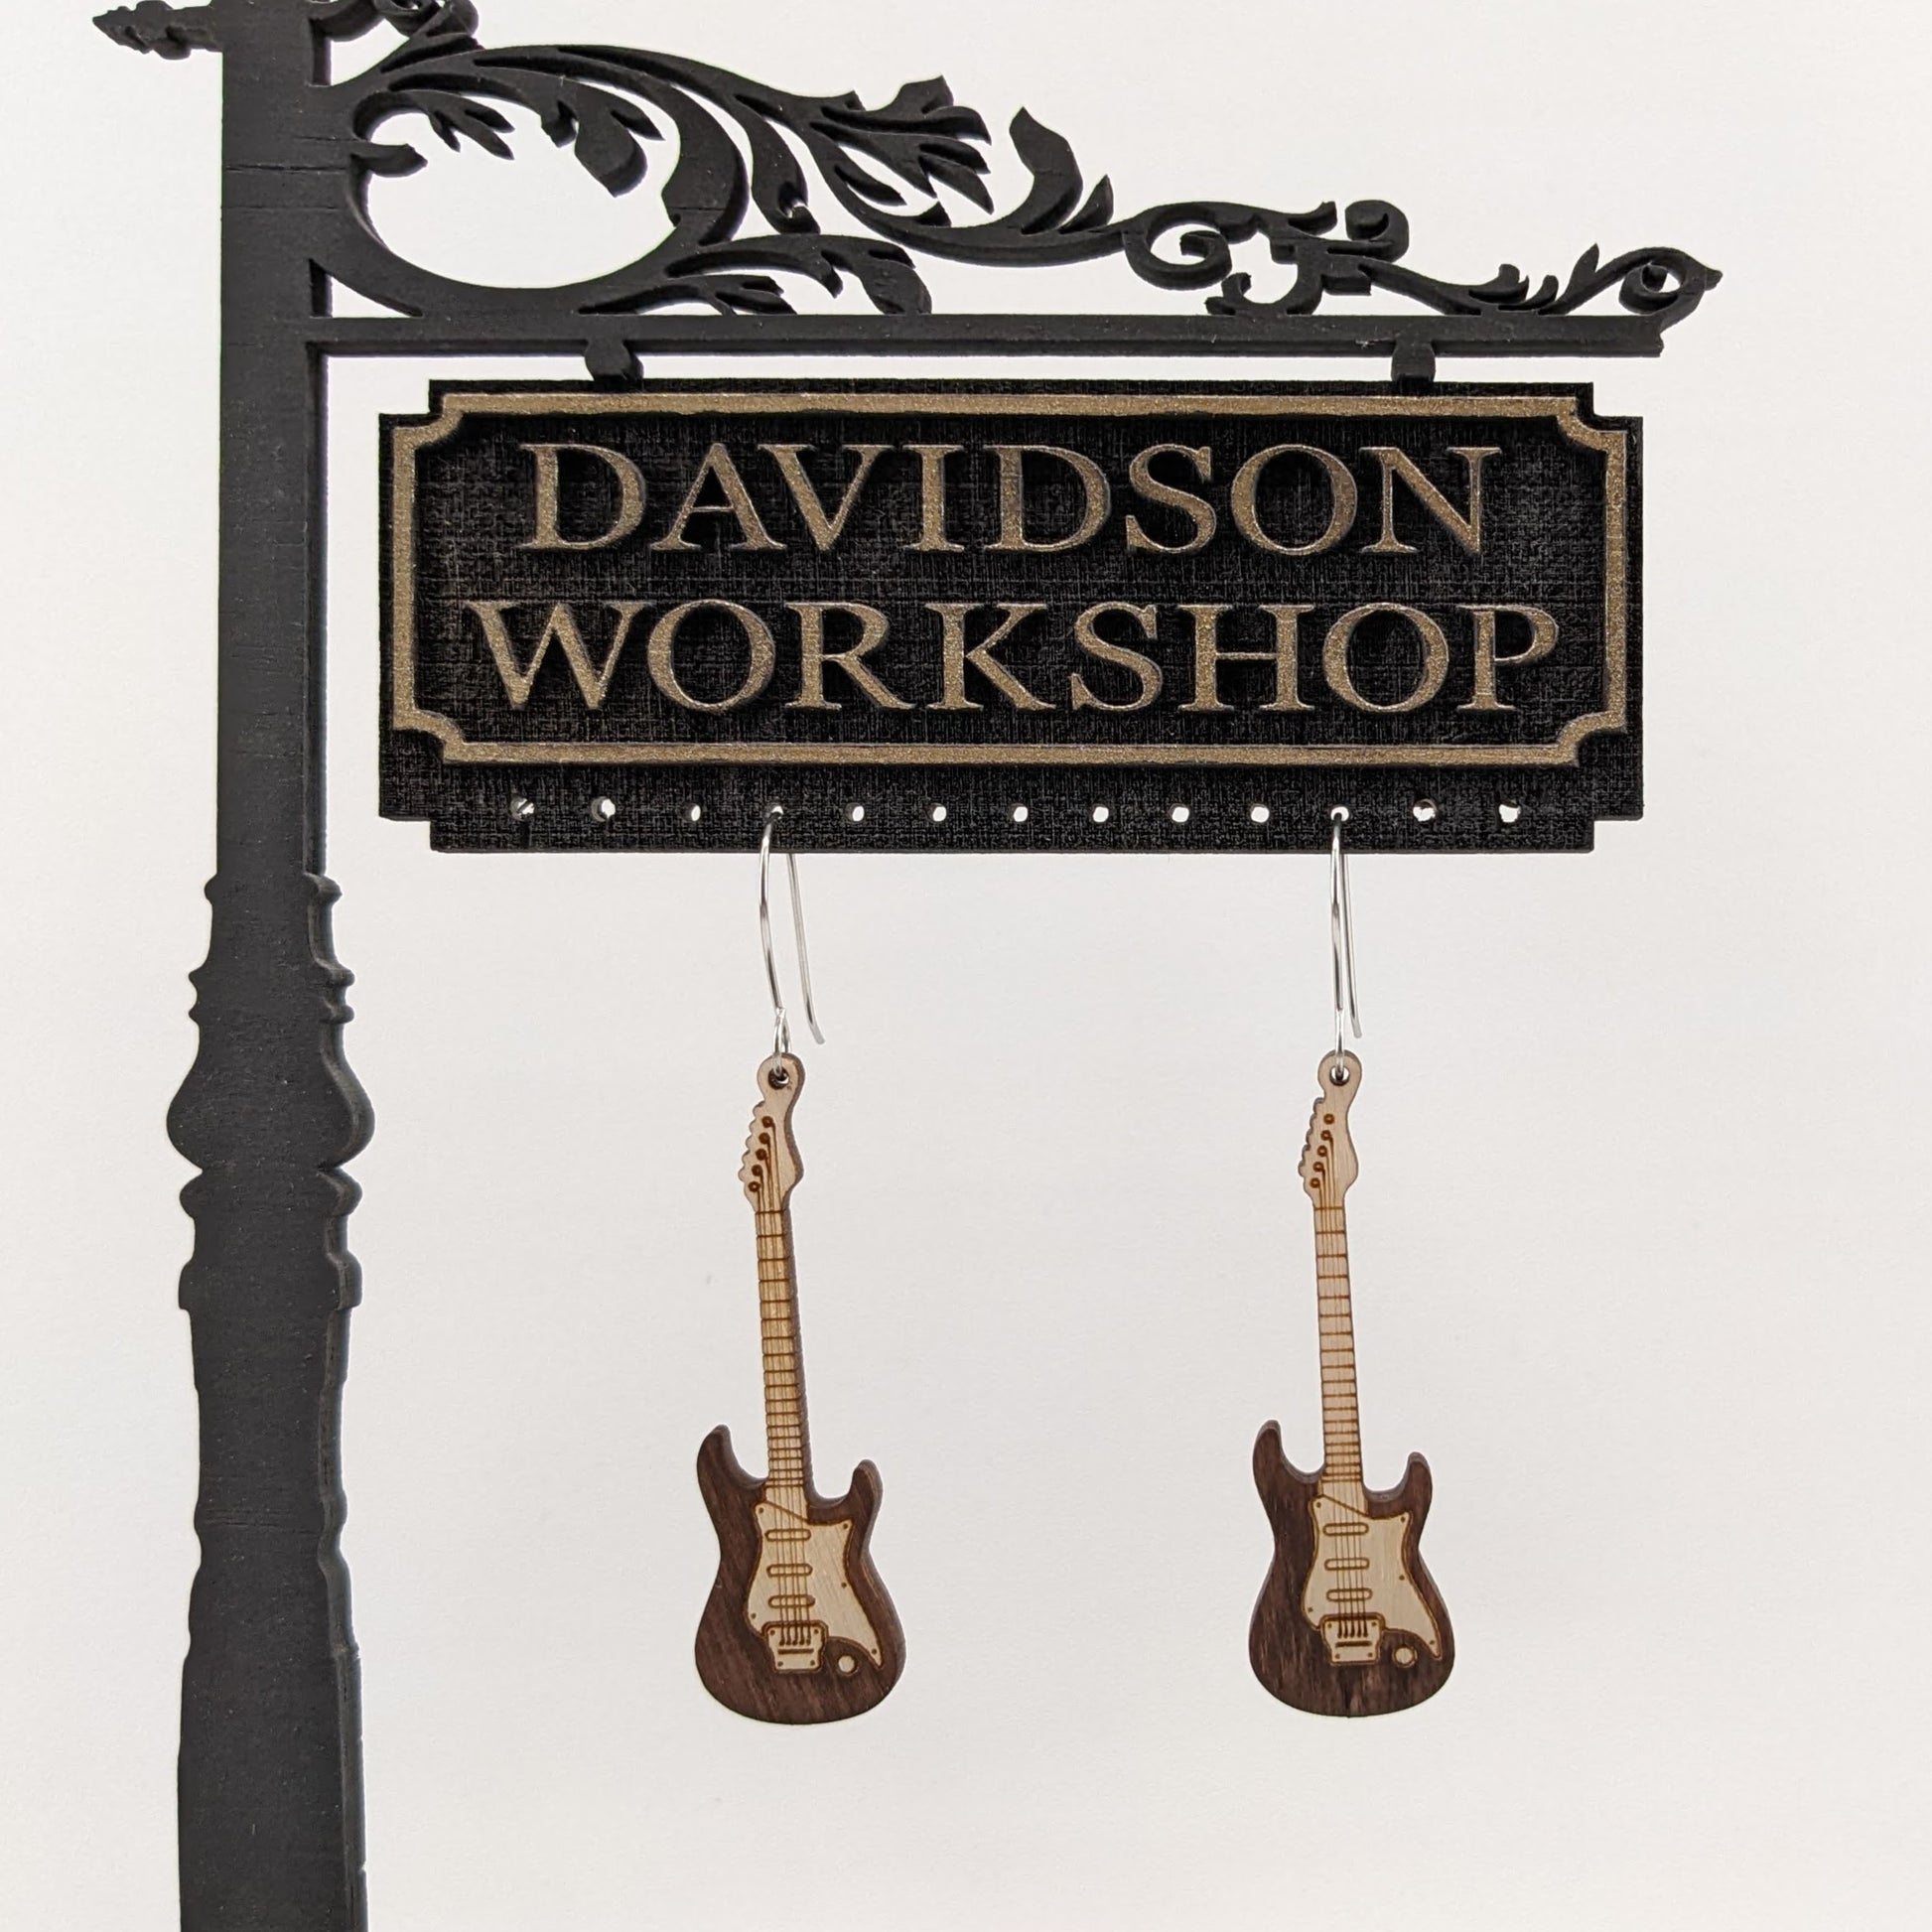 Pair of wooden earrings with silver stainless steel hooks. They are two toned light and dark brown Stratocaster style electric guitars.  Made from birch wood hanging from a model Davidson Workshop sign against a white background.